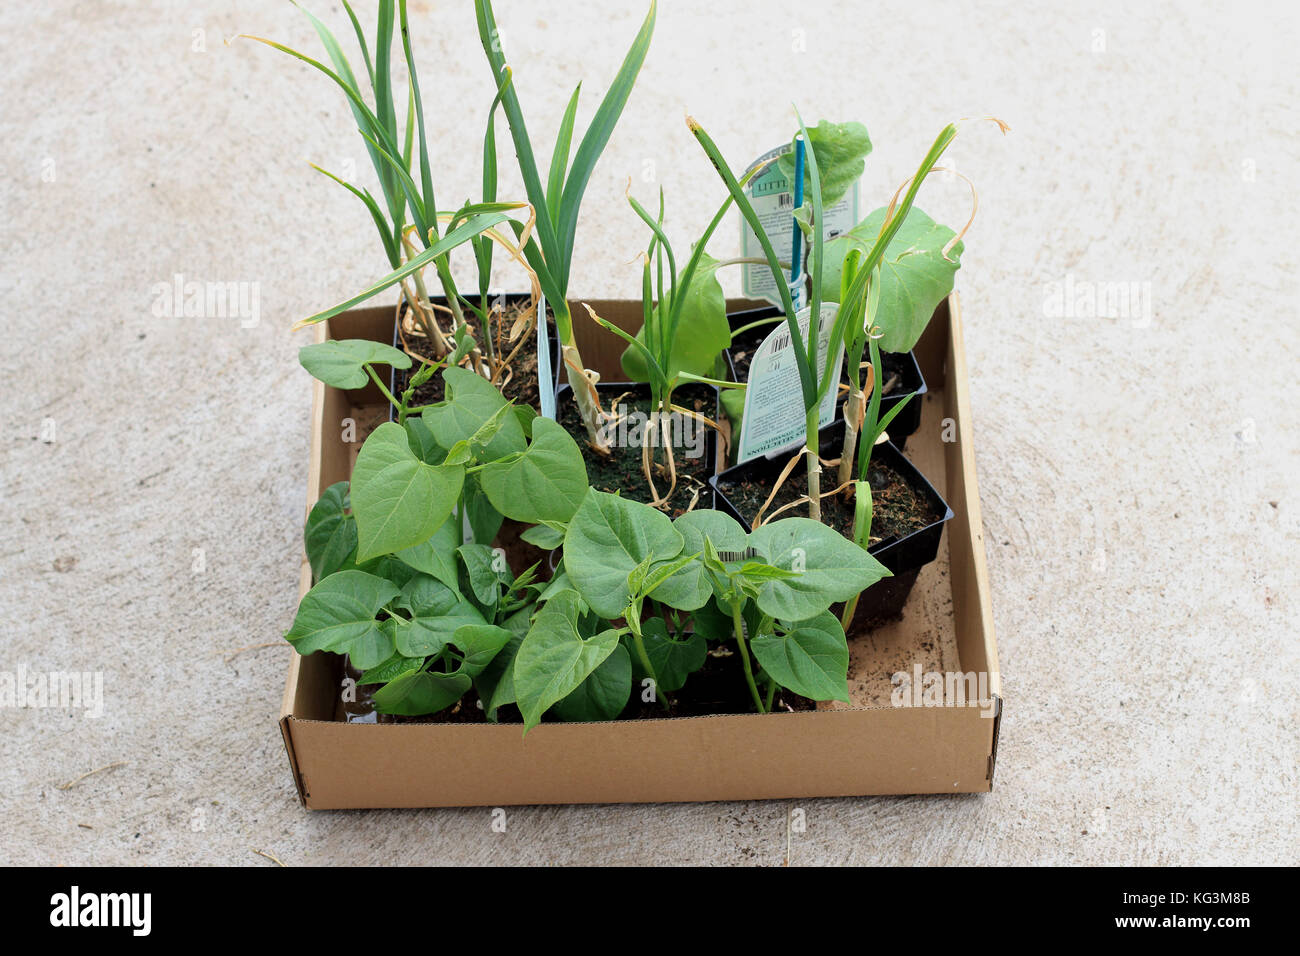 Garlic, egg plant and Green Beans seedlings ready to be planted in the ground Stock Photo